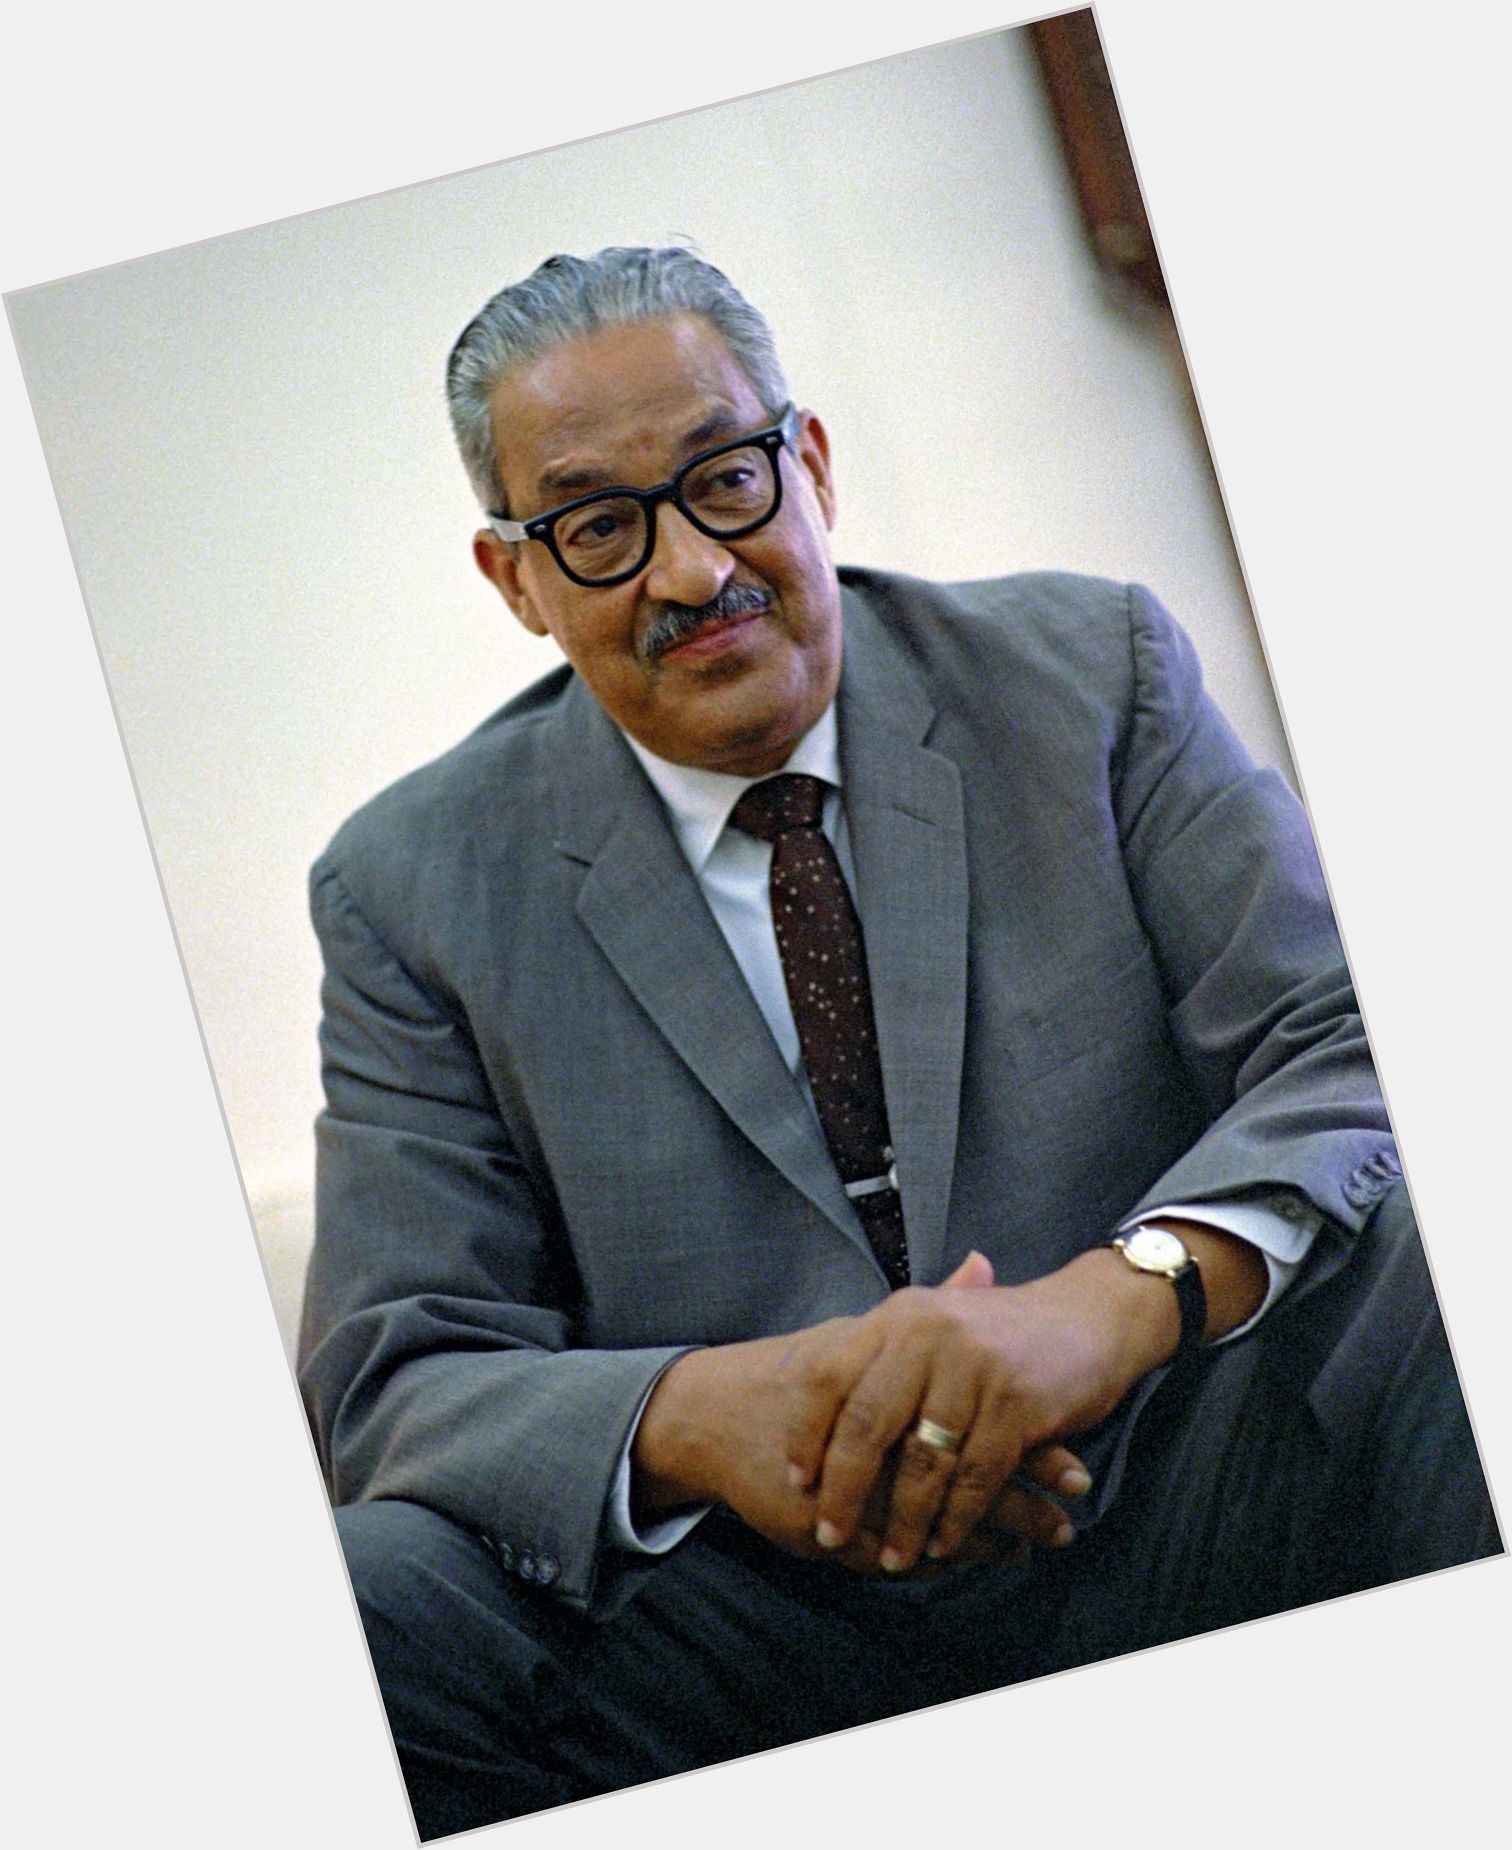 Thurgood Marshall exclusive hot pic 3.jpg